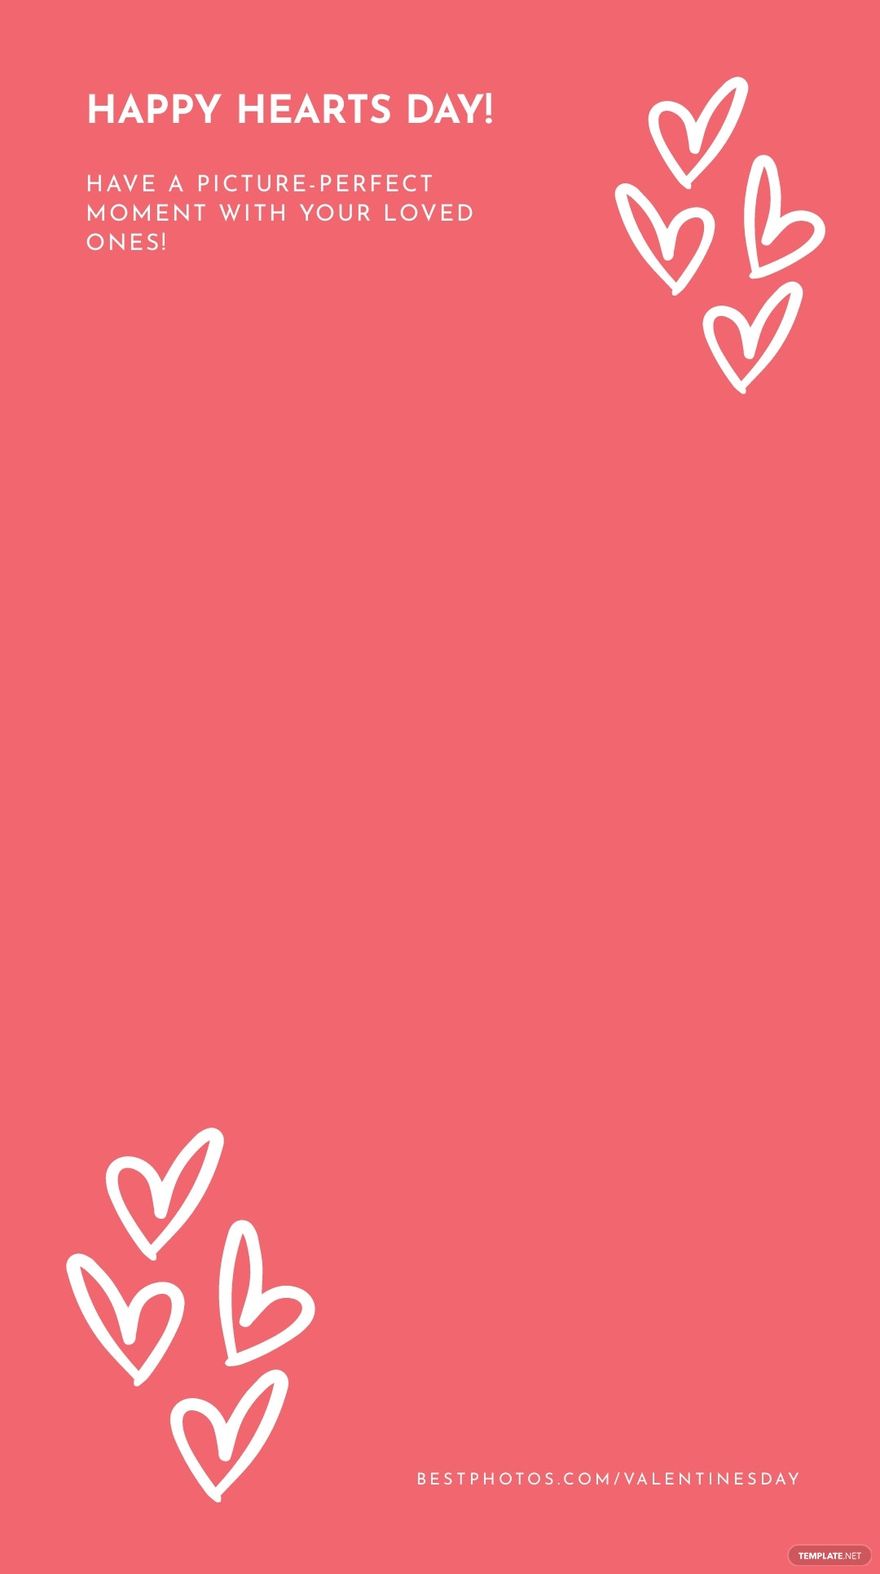 Free Photo Valentine's Day Snapchat Geofilter Template